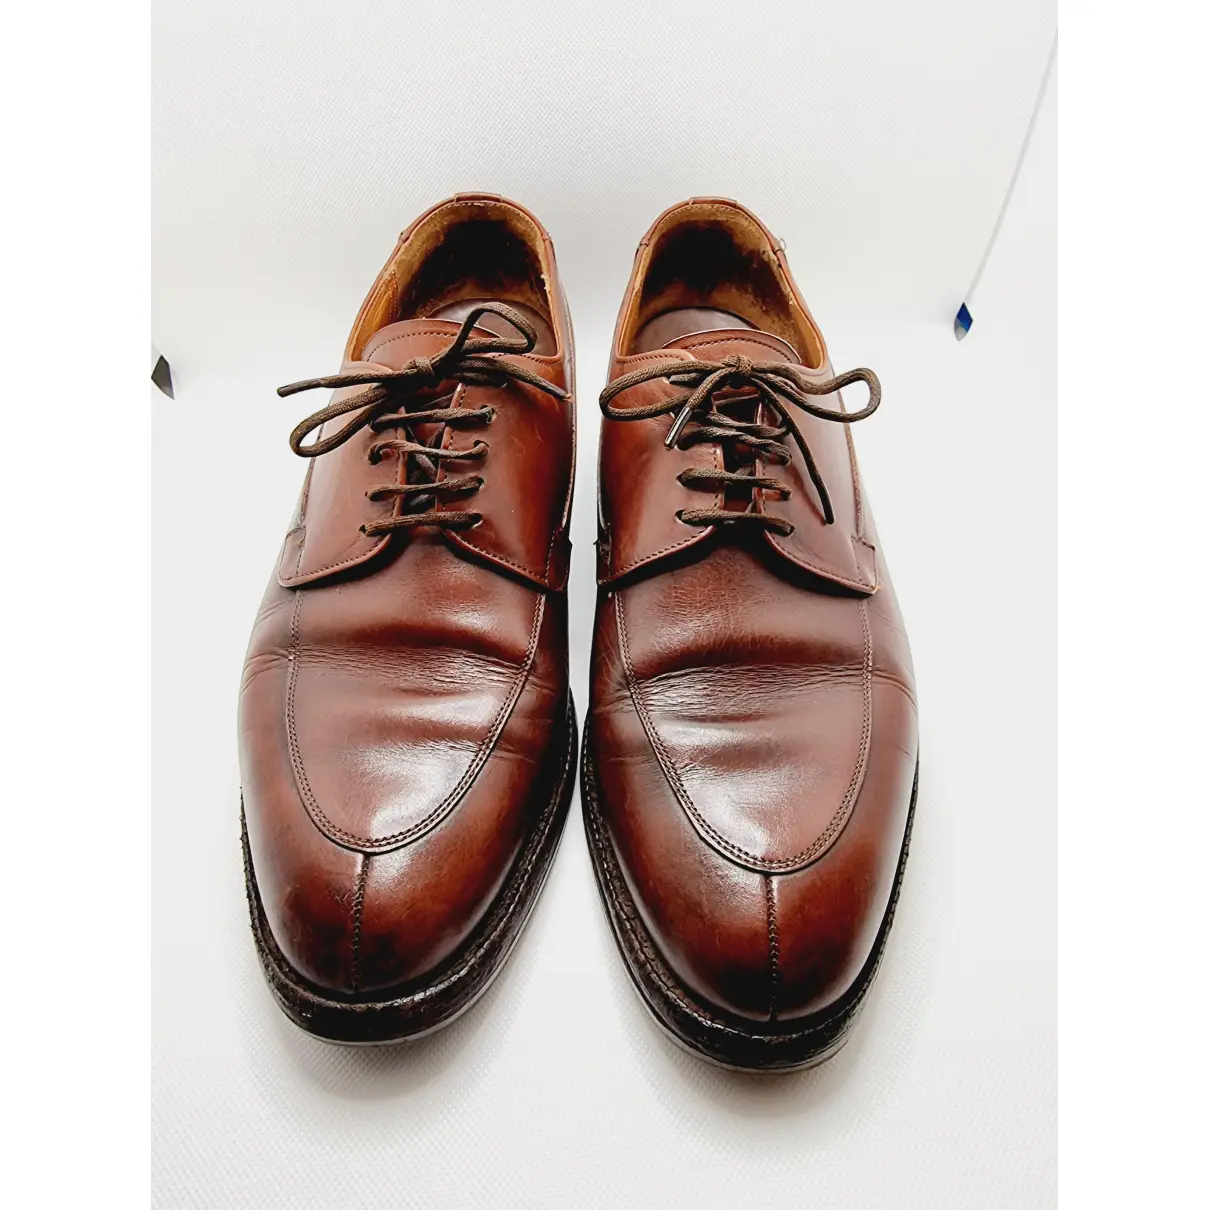 Buy Church's Leather lace ups online - Vintage